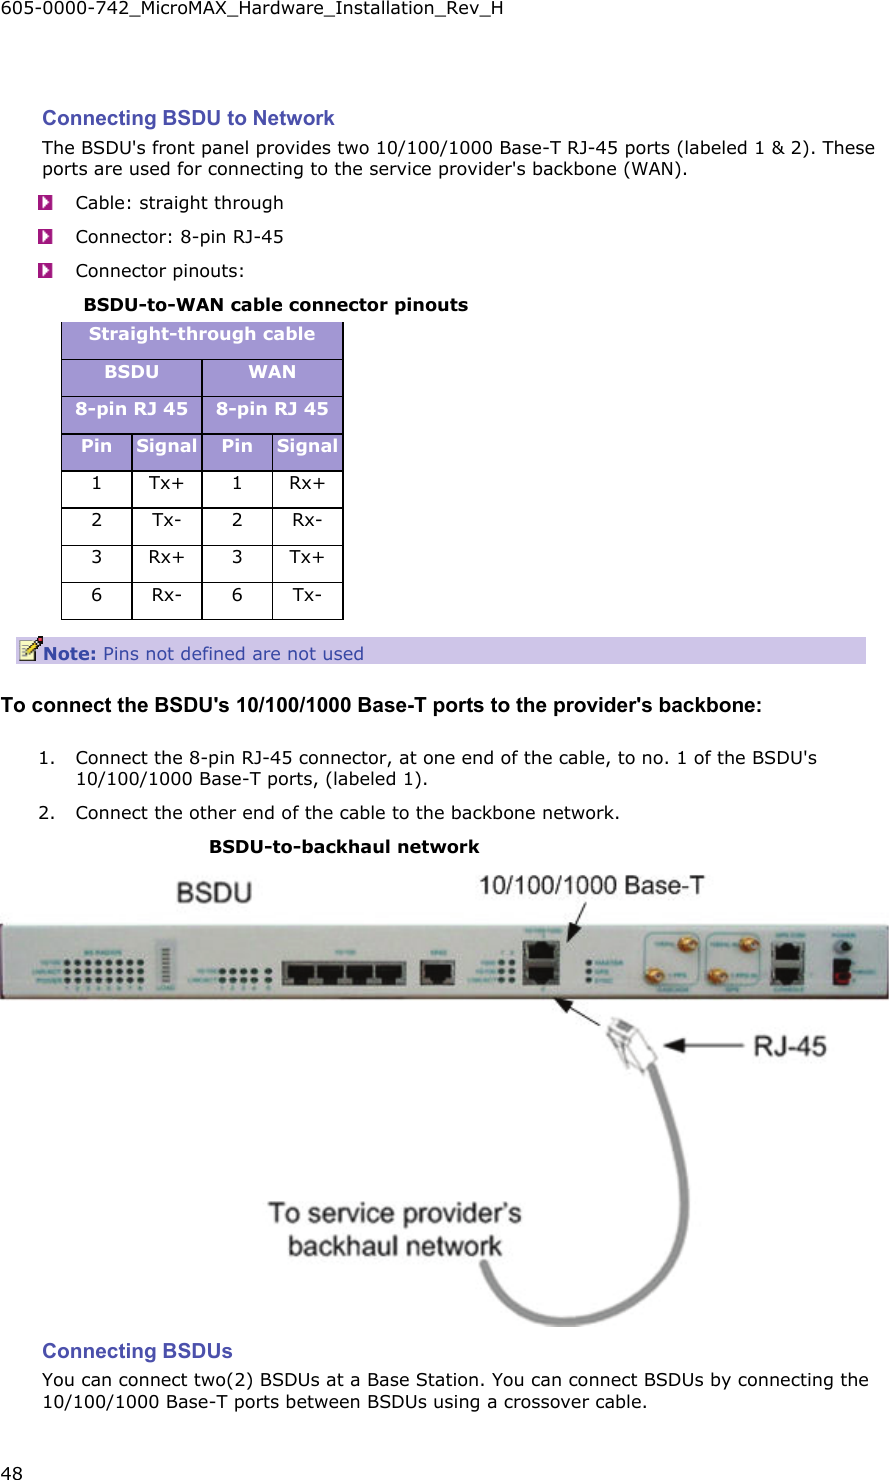 605-0000-742_MicroMAX_Hardware_Installation_Rev_H 48      Connecting BSDU to Network The BSDU&apos;s front panel provides two 10/100/1000 Base-T RJ-45 ports (labeled 1 &amp; 2). These ports are used for connecting to the service provider&apos;s backbone (WAN).  Cable: straight through  Connector: 8-pin RJ-45  Connector pinouts: BSDU-to-WAN cable connector pinouts Straight-through cable BSDU  WAN 8-pin RJ 45  8-pin RJ 45 Pin  Signal Pin  Signal 1 Tx+ 1 Rx+ 2 Tx- 2 Rx- 3 Rx+ 3 Tx+ 6 Rx- 6 Tx- Note: Pins not defined are not used To connect the BSDU&apos;s 10/100/1000 Base-T ports to the provider&apos;s backbone: 1. Connect the 8-pin RJ-45 connector, at one end of the cable, to no. 1 of the BSDU&apos;s 10/100/1000 Base-T ports, (labeled 1). 2. Connect the other end of the cable to the backbone network. BSDU-to-backhaul network  Connecting BSDUs You can connect two(2) BSDUs at a Base Station. You can connect BSDUs by connecting the 10/100/1000 Base-T ports between BSDUs using a crossover cable. 